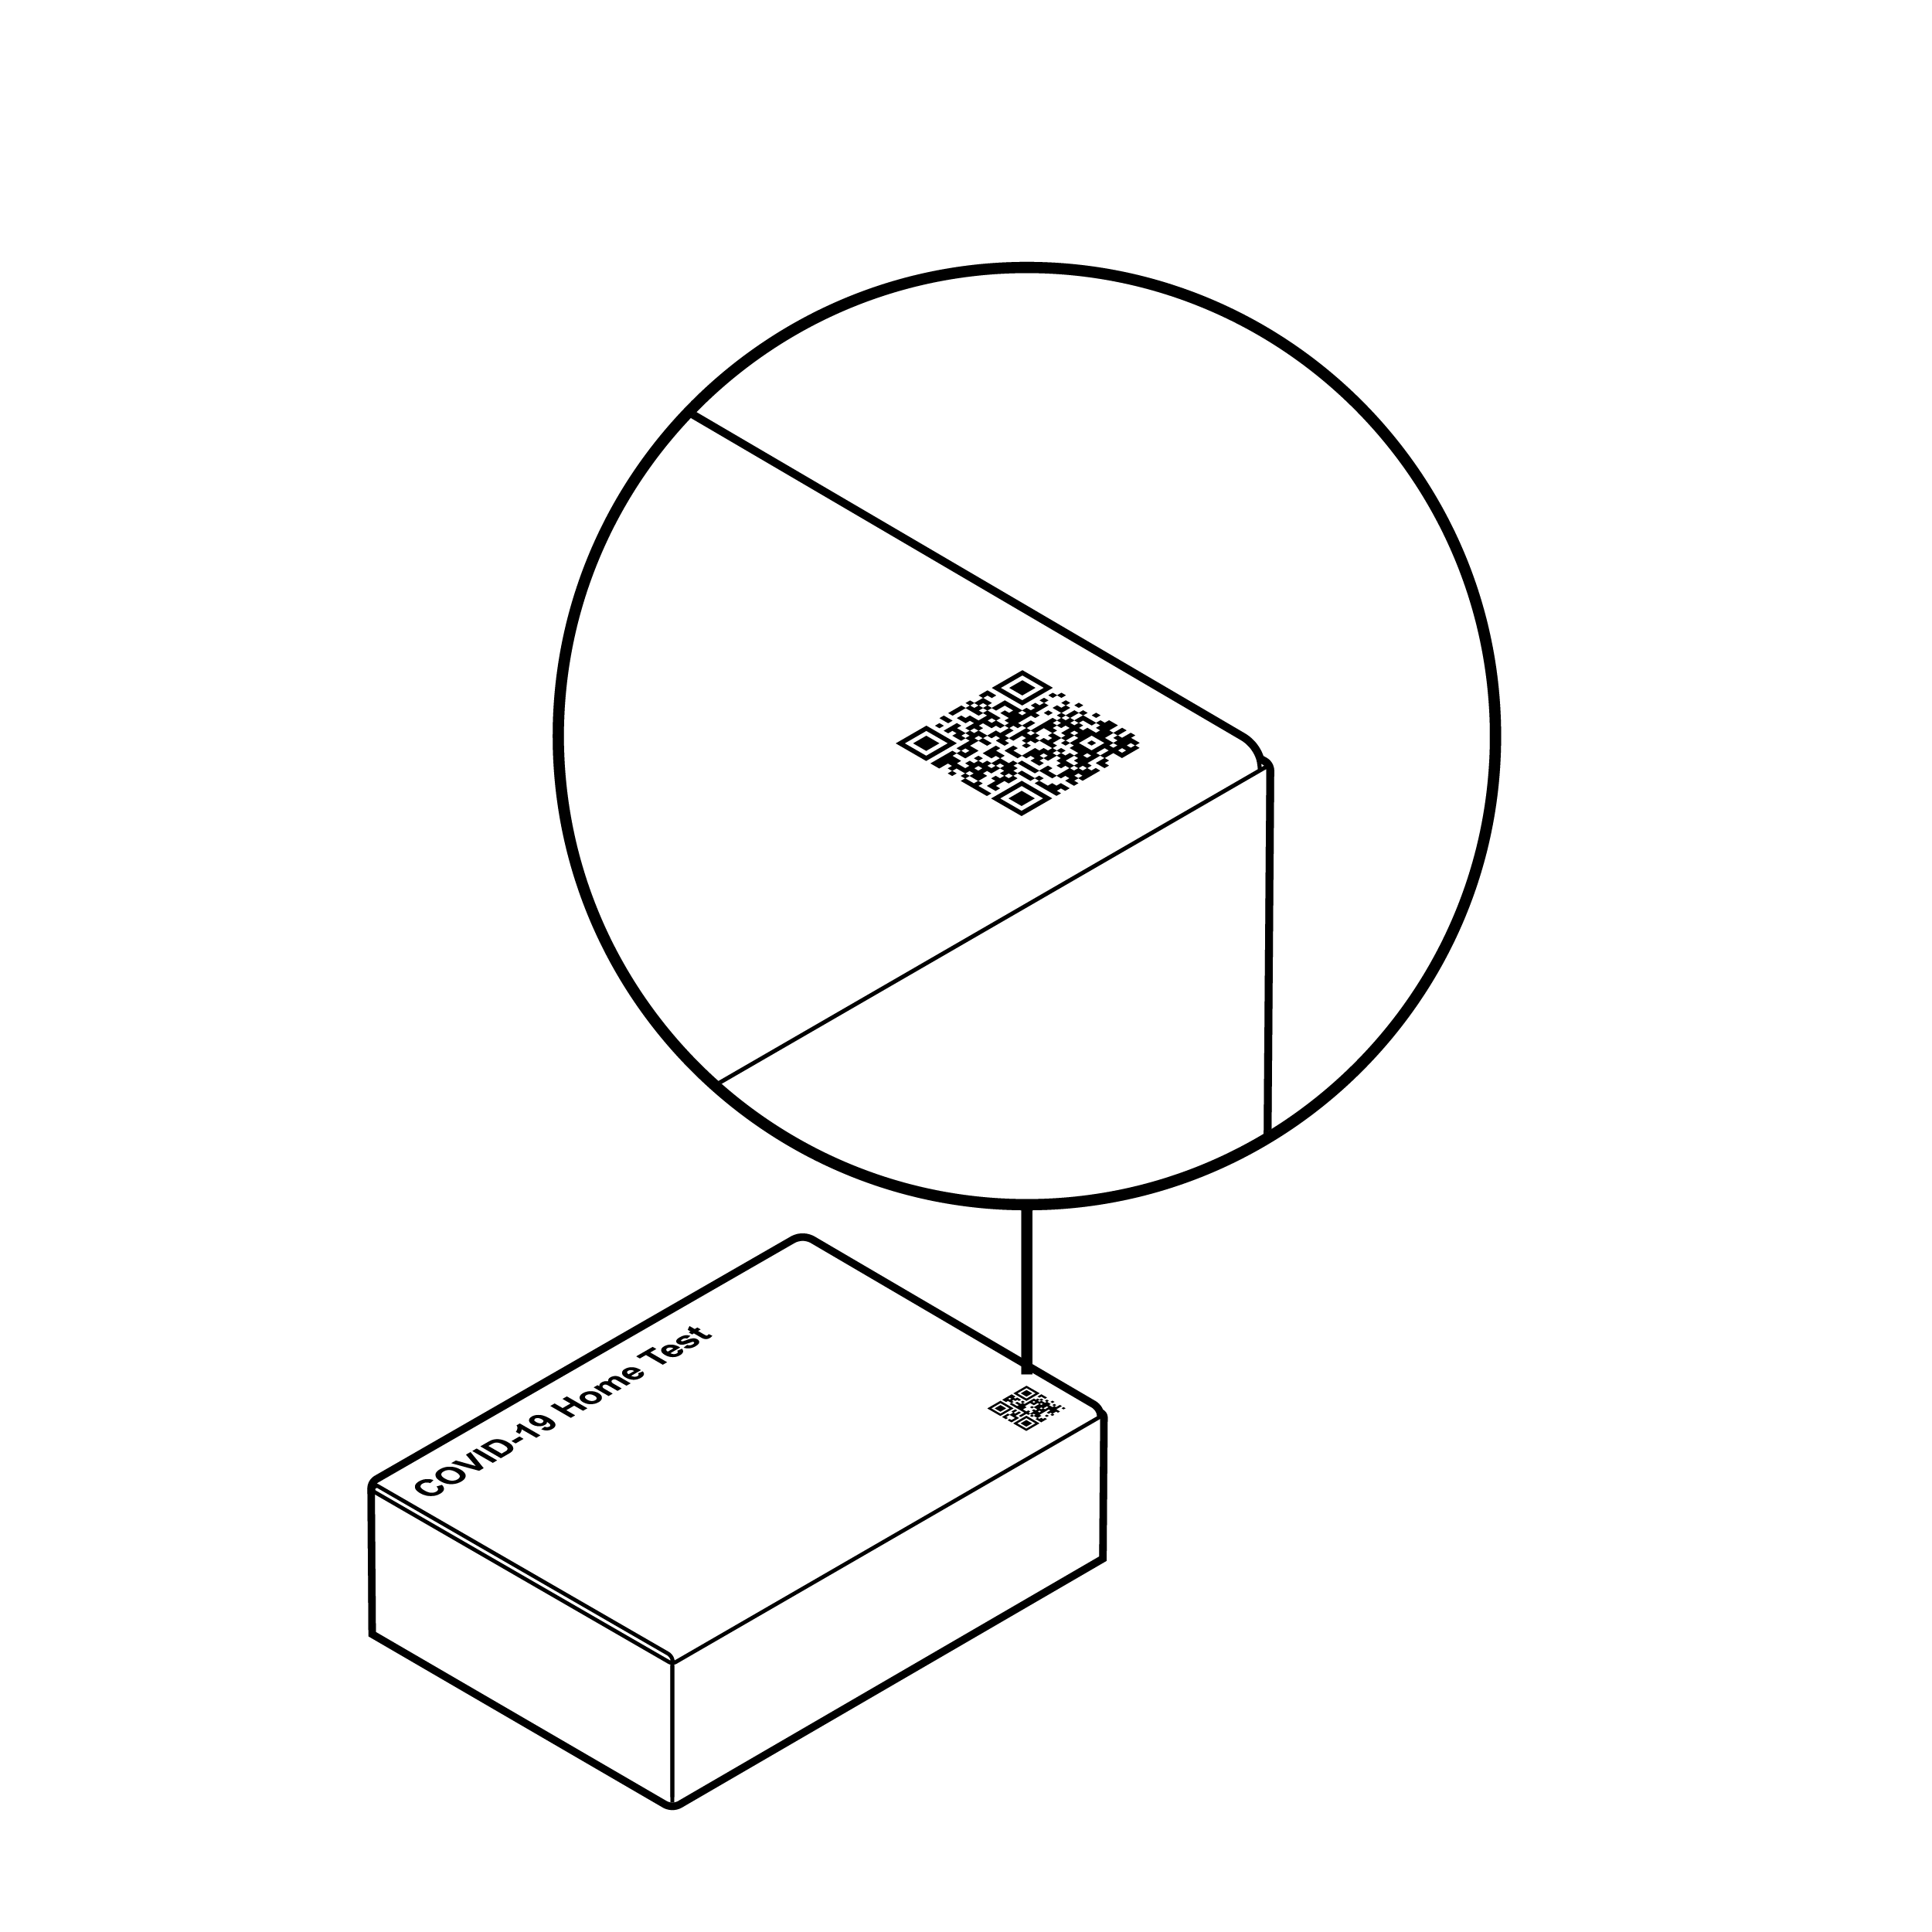 Box with QR code printed on the surface. Zoomed-in image shows that the QR code is flat and even with the surface of the box.